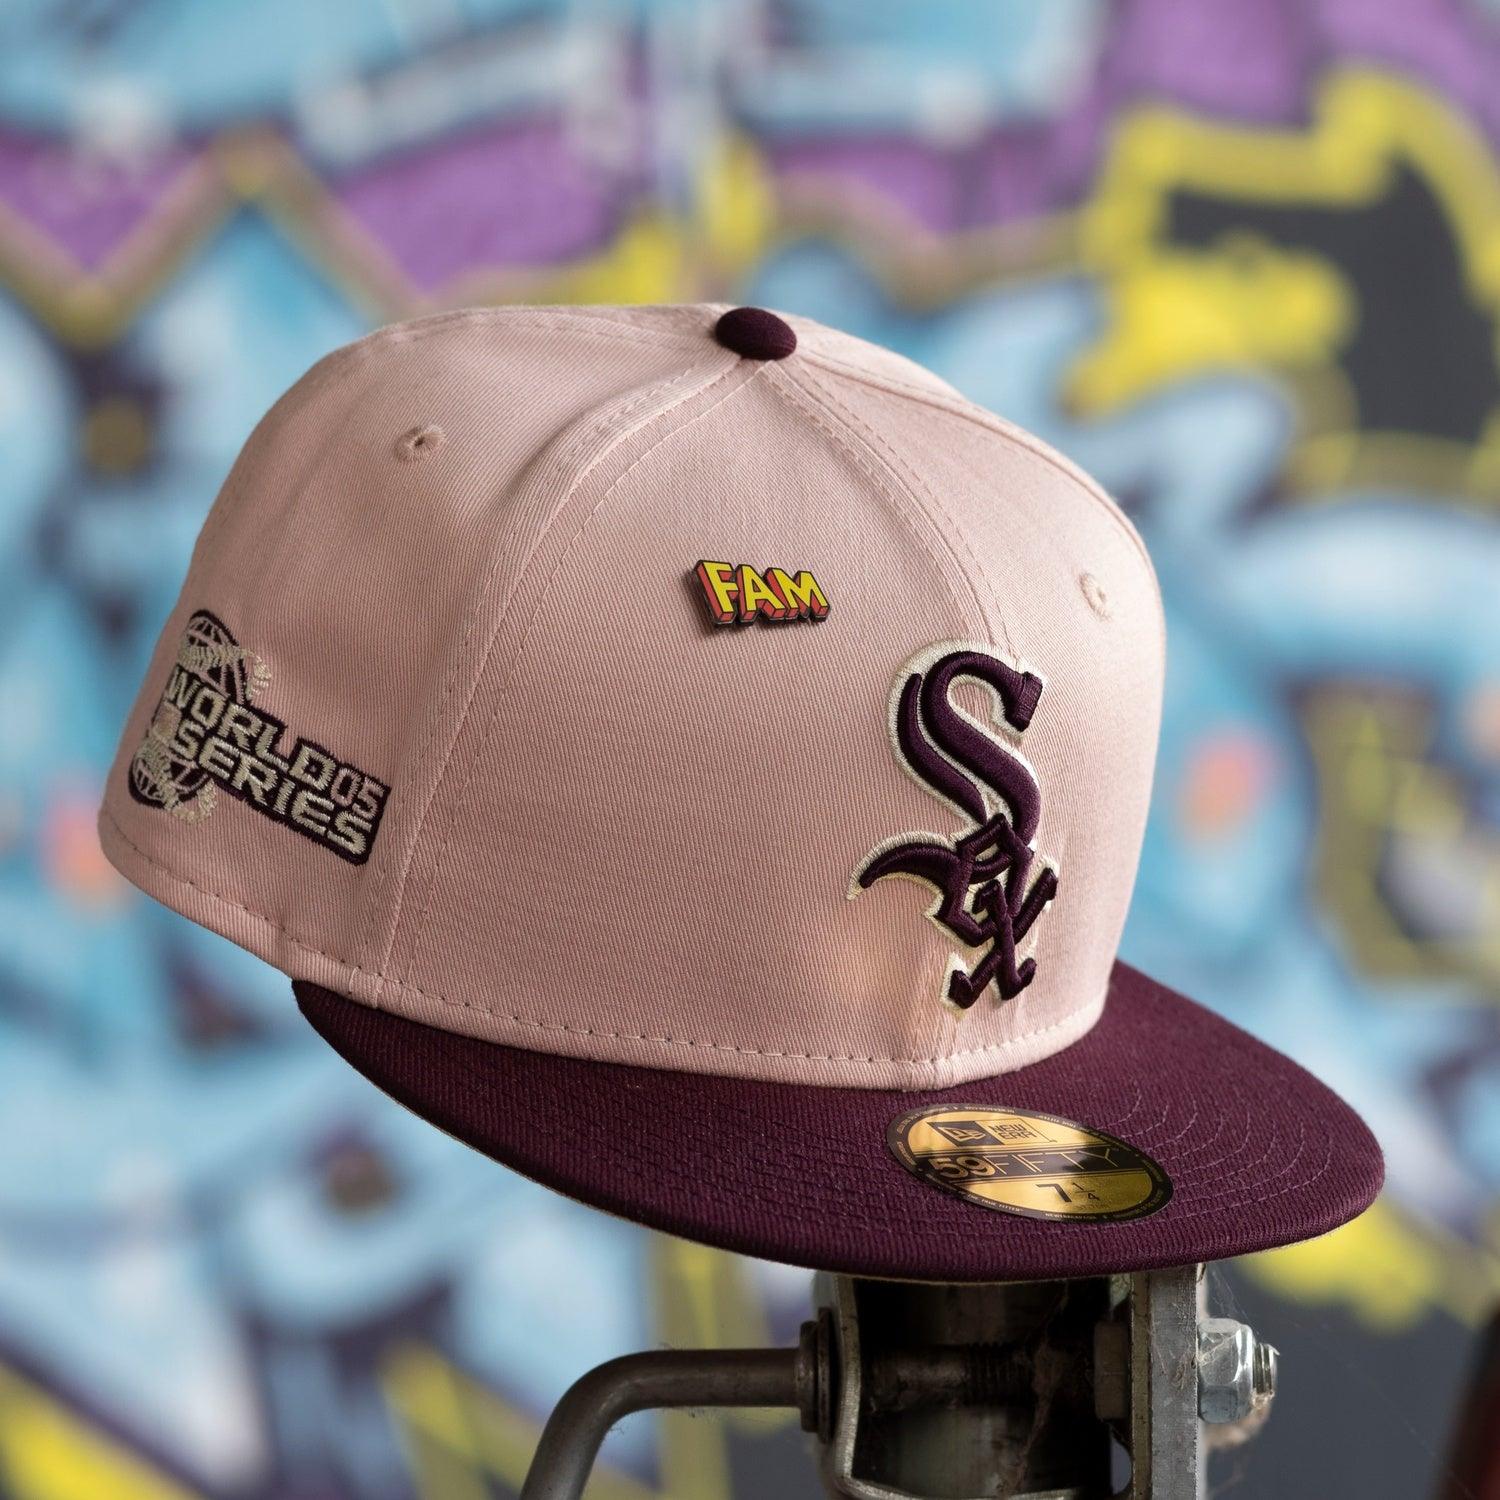 NEW ERA 59FIFTY MLB CHICAGO WHITE SOX WORLD SERIES 2005 TWO TONE / SOFT YELLOW UV FITTED CAP - FAM